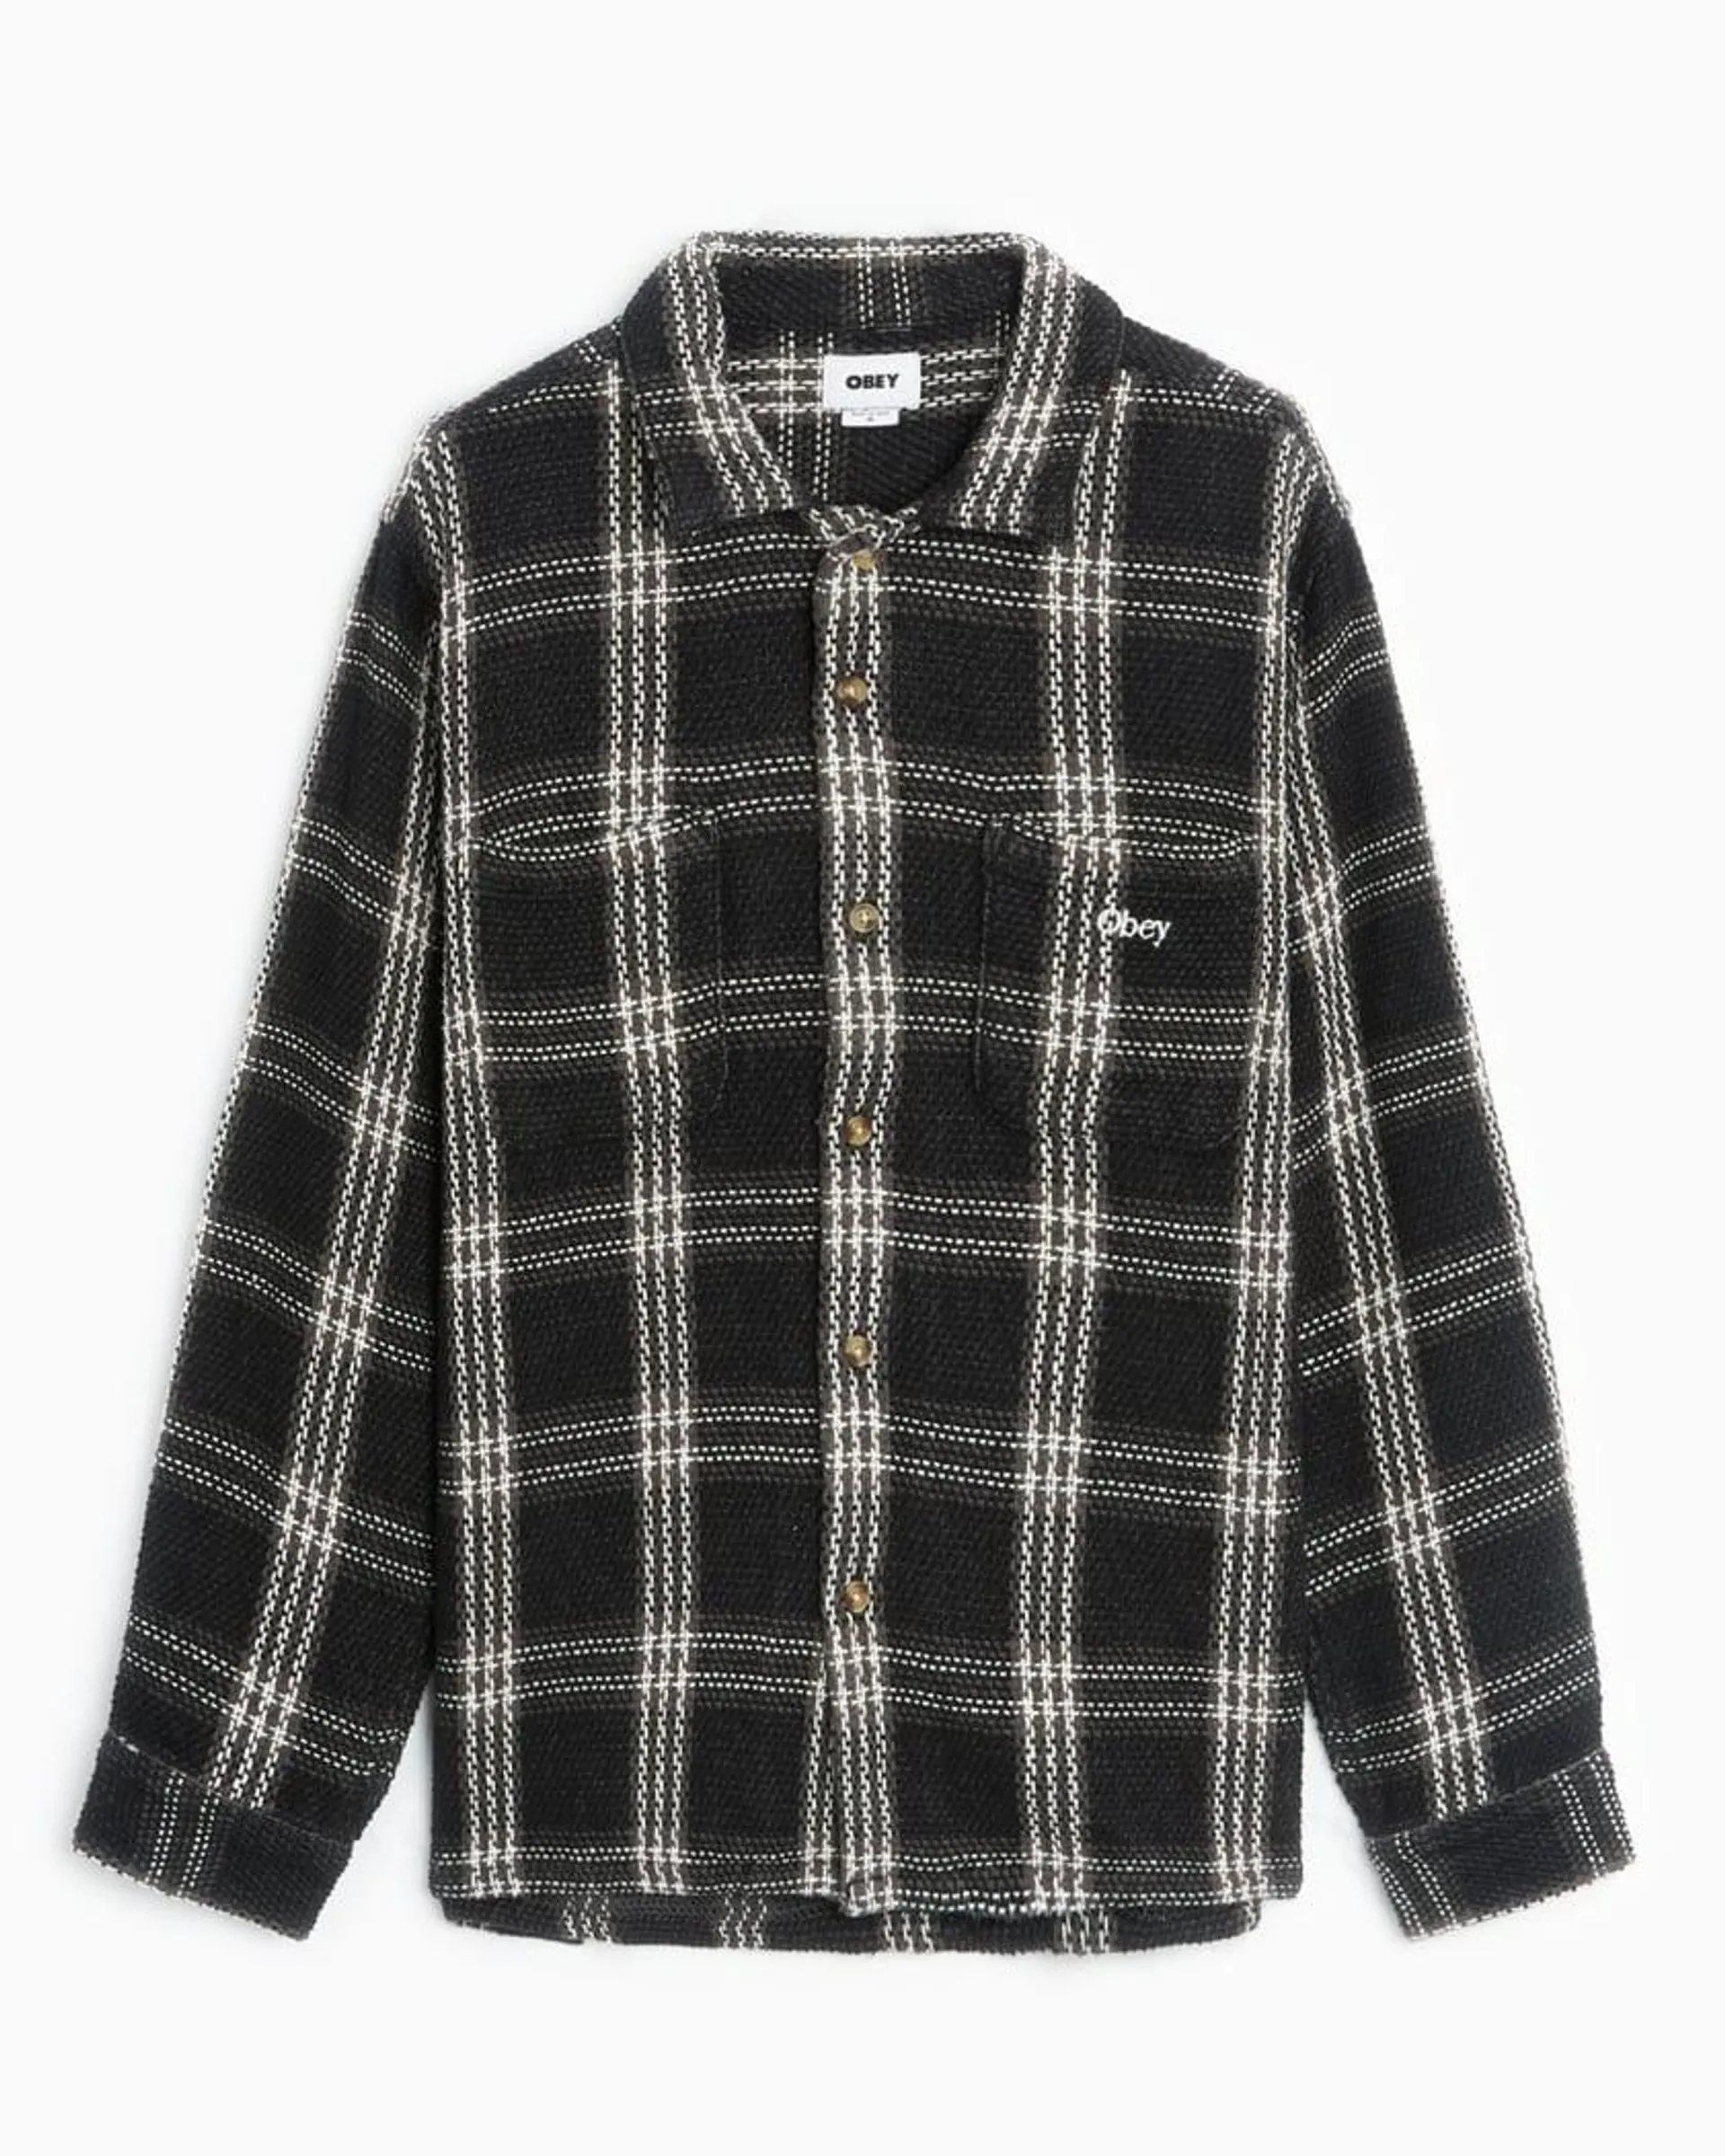 OBEY Clothing Wes Men's Woven Shirt